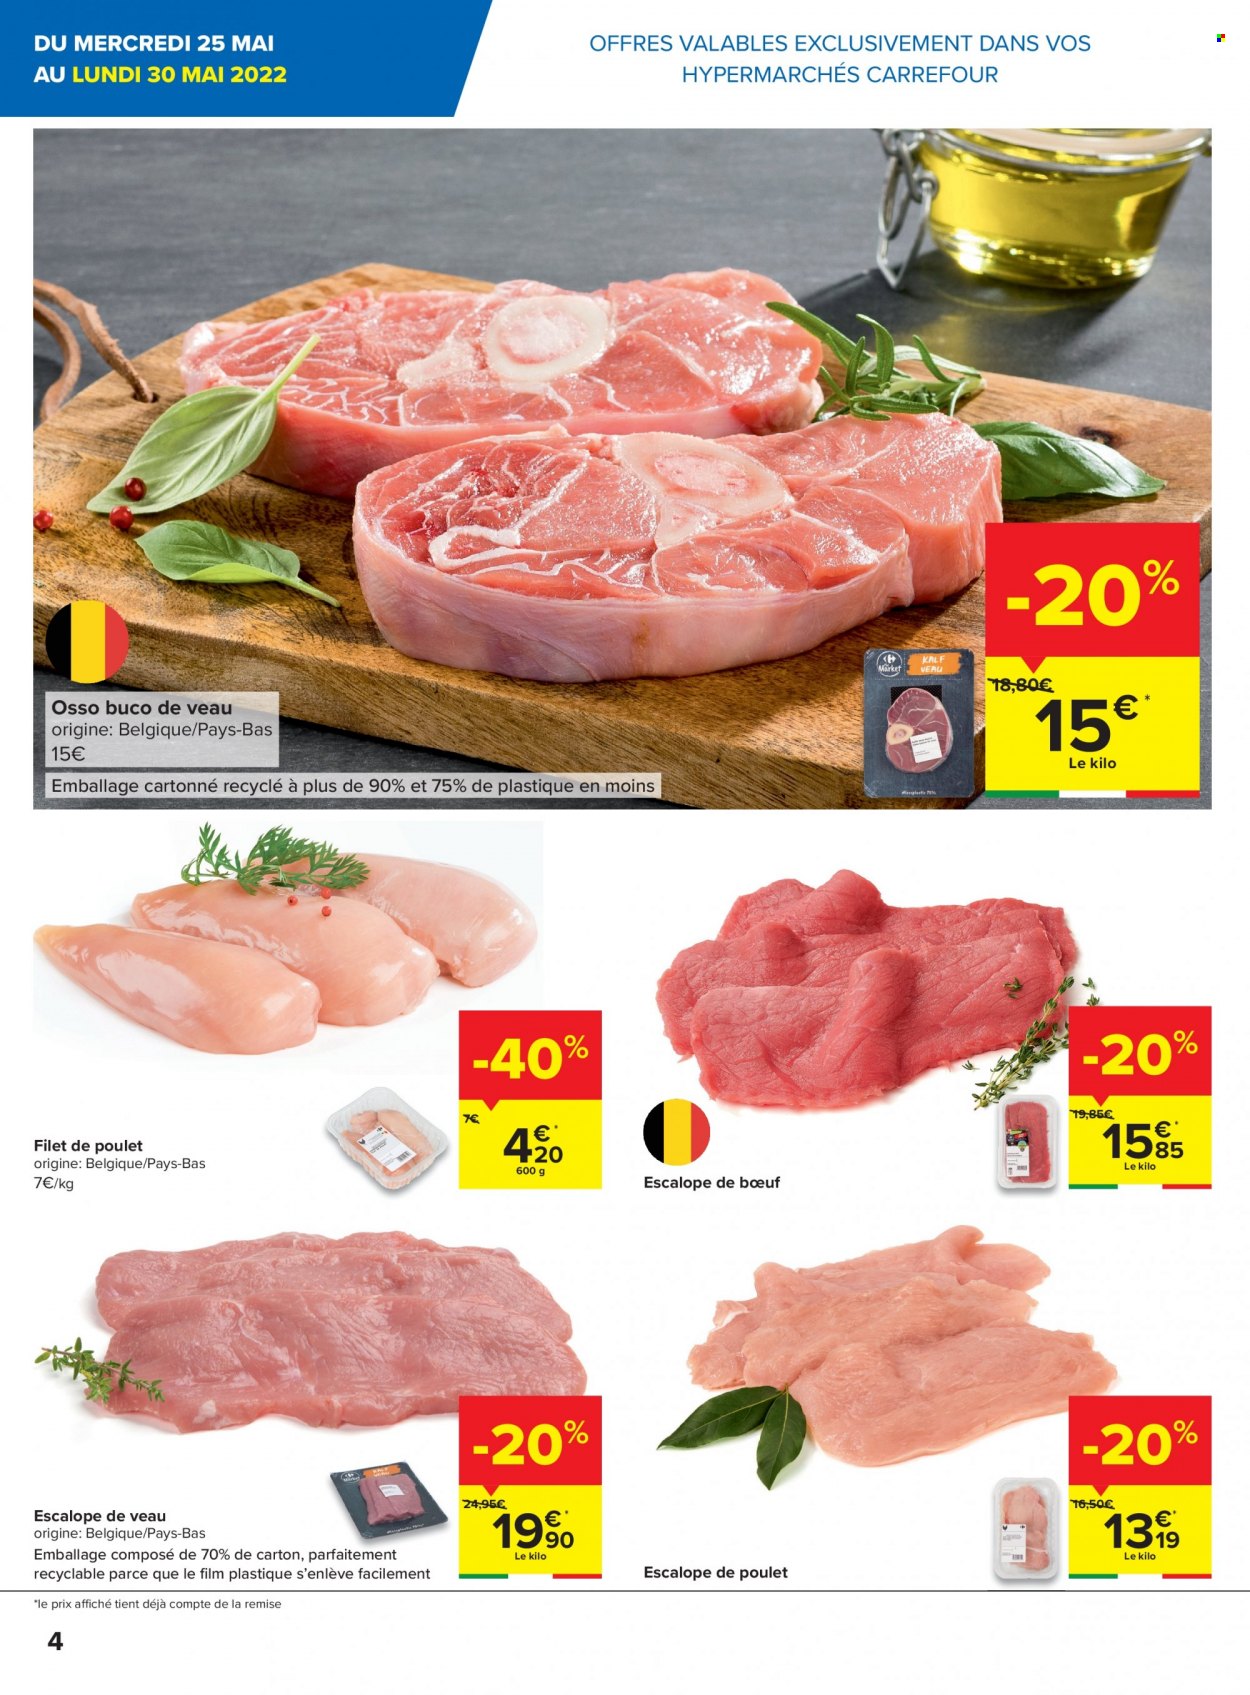 Catalogue Carrefour hypermarkt - 25.5.2022 - 31.5.2022. Page 4.